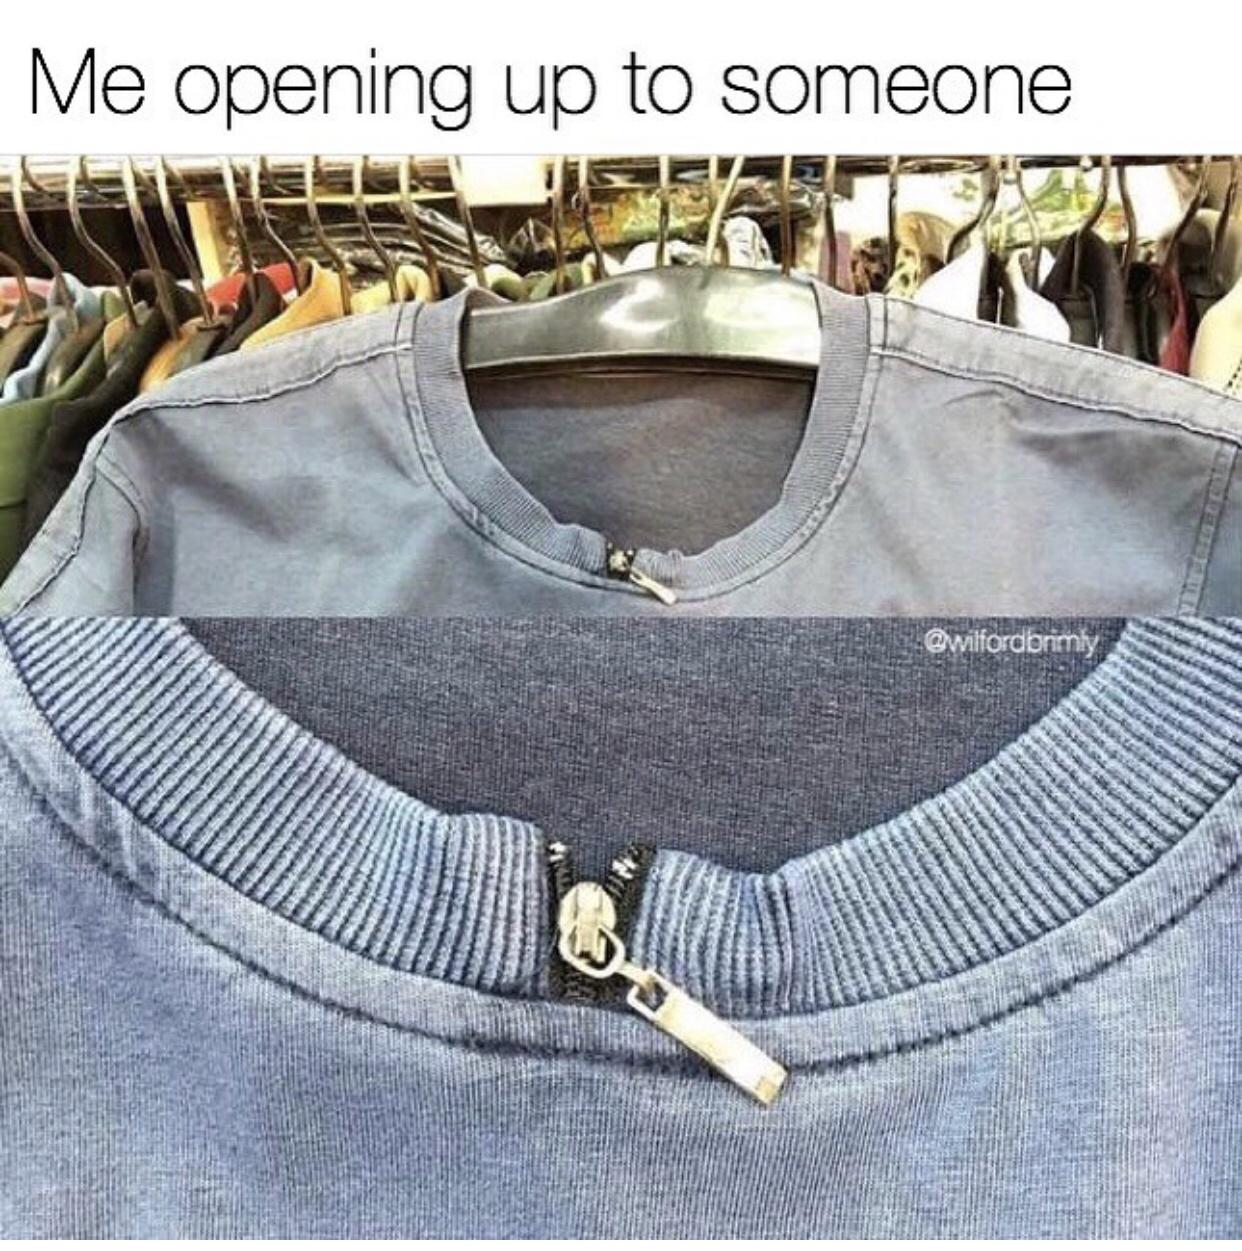 funny relatable memes clean - Me opening up to someone